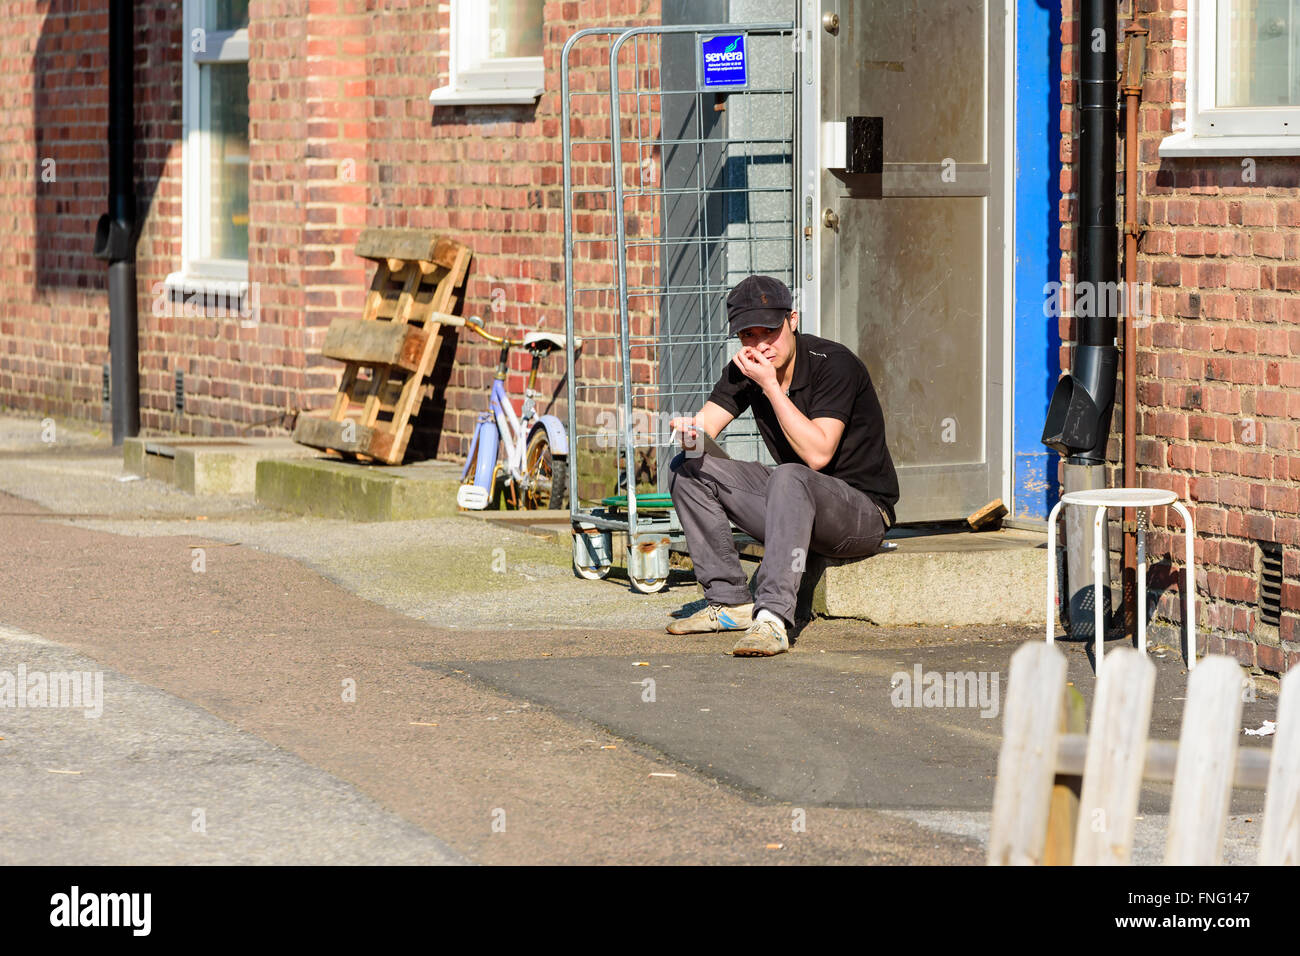 Lund, Sweden - March 12, 2016: Young male adult is having a break and a smoke outside the back entrance to a restaurant. He sits Stock Photo